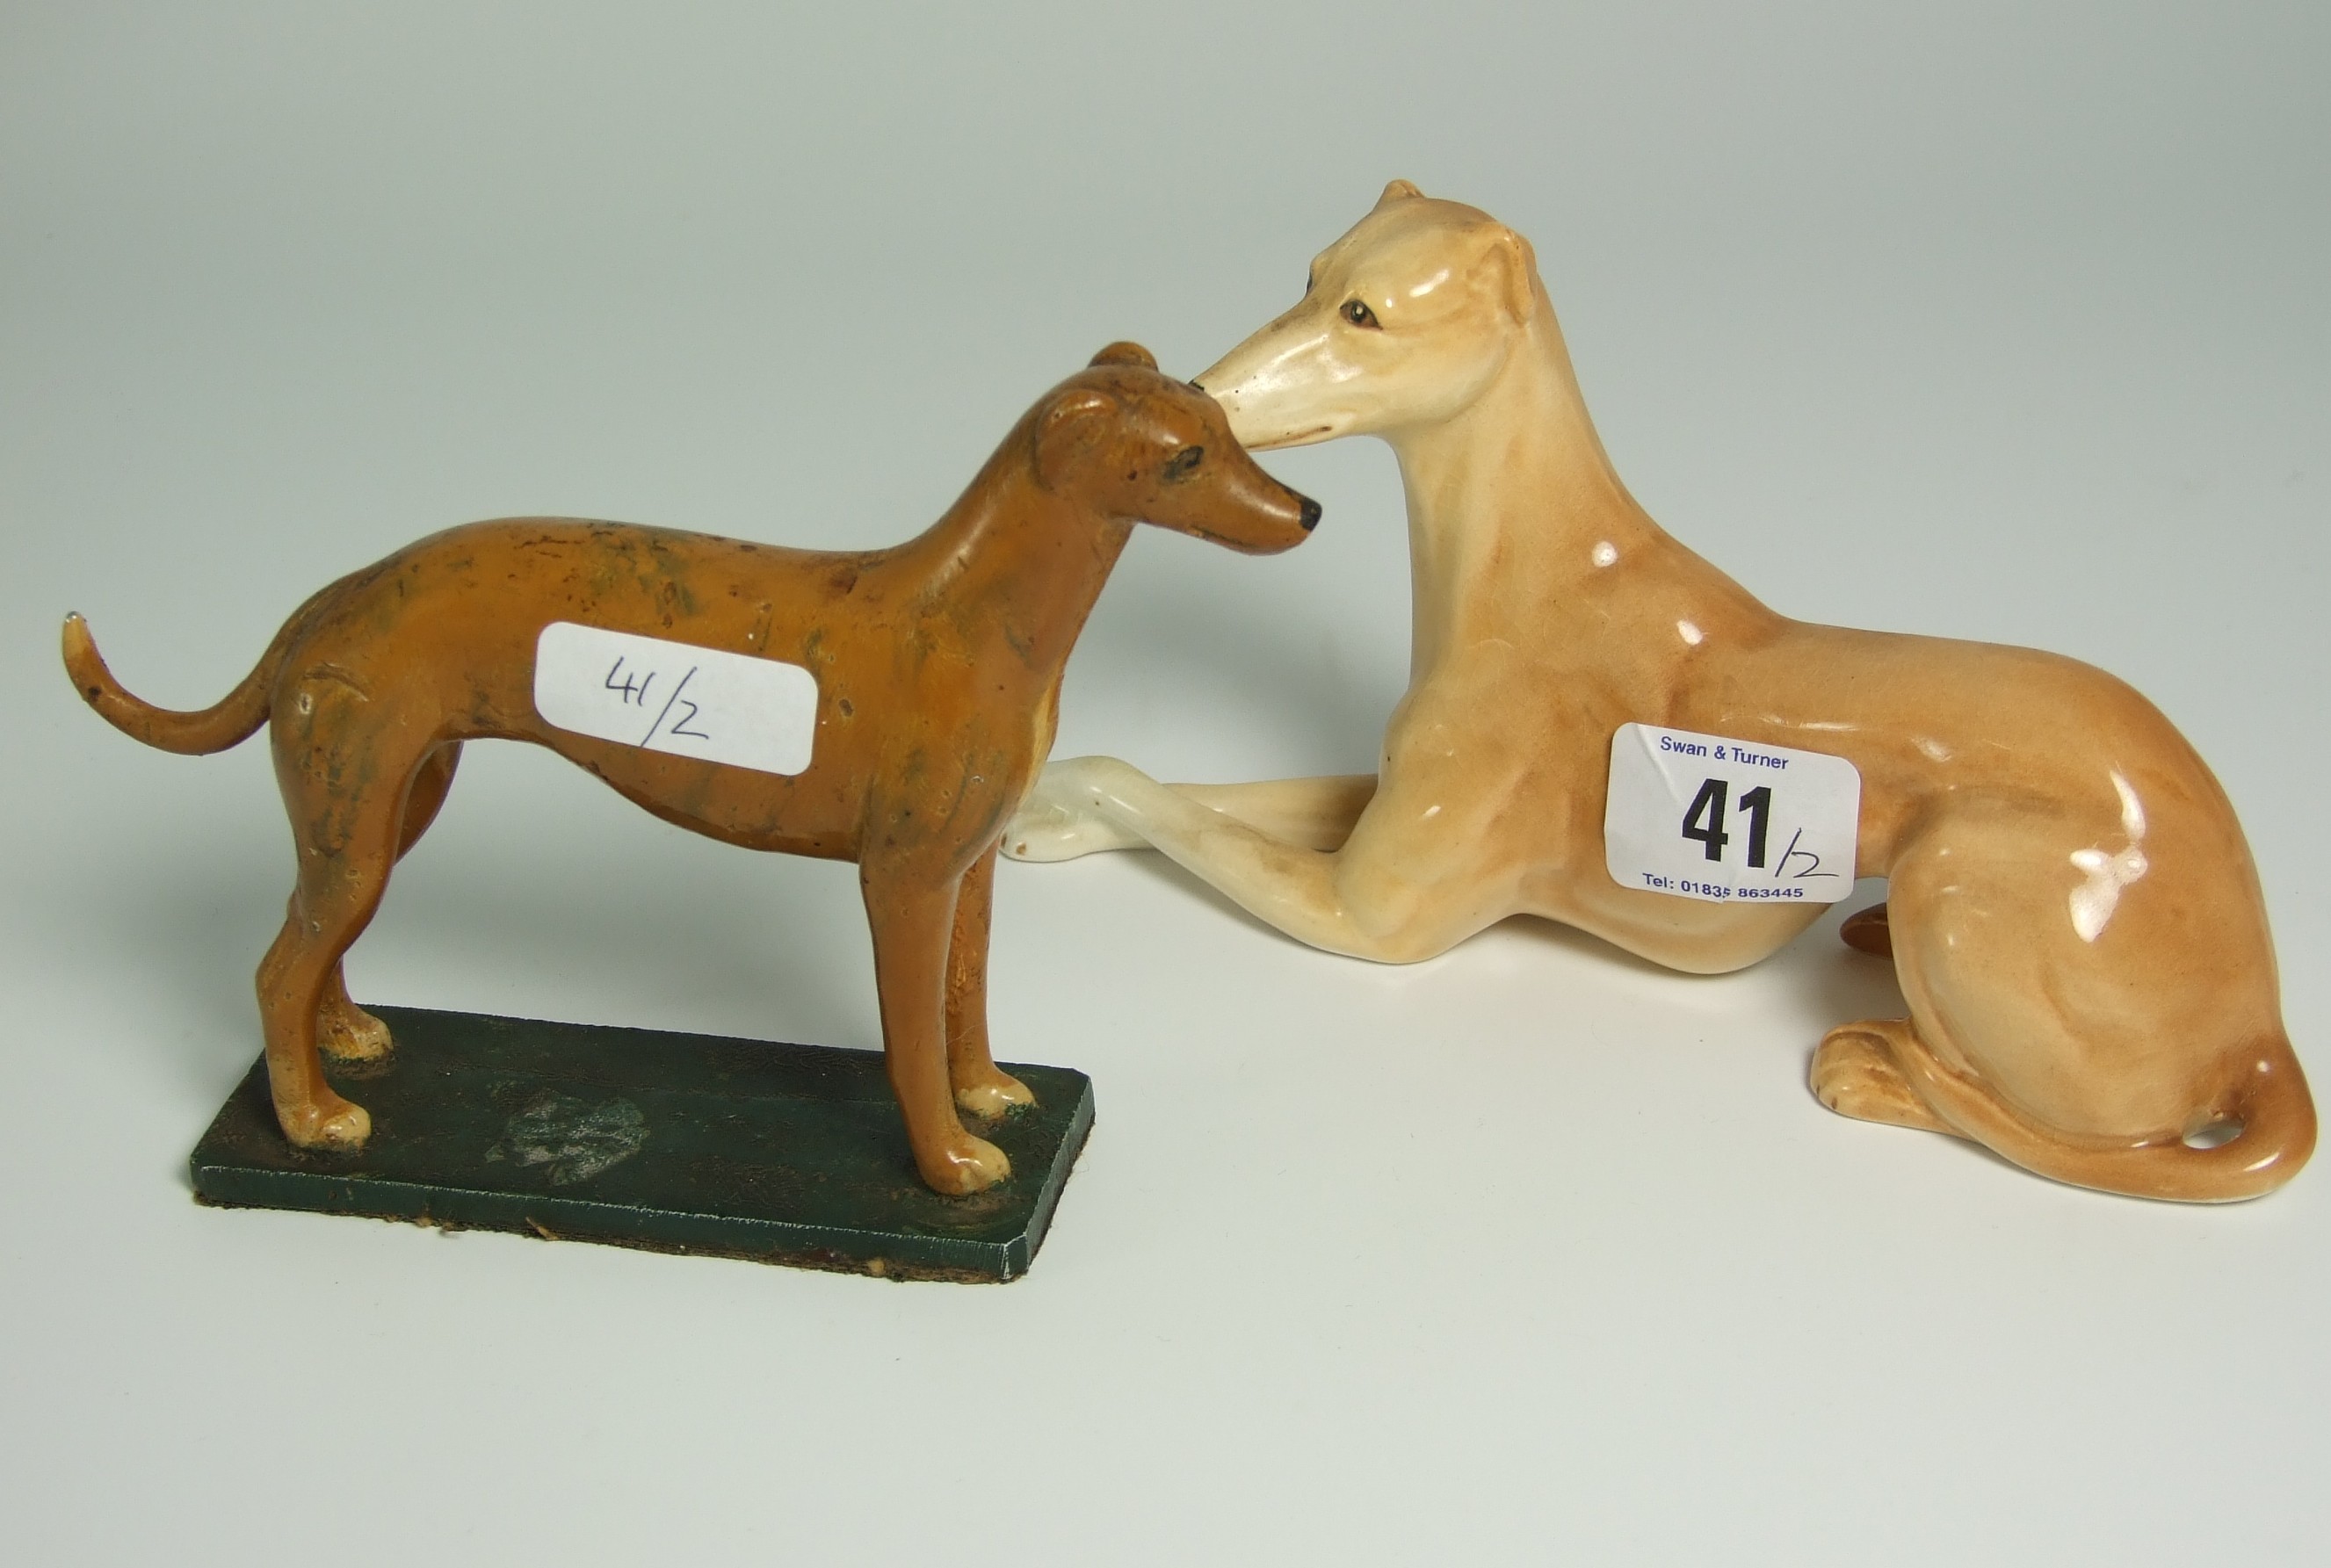 Painted Metal Figure of a Greyhound plus Porcelain Greyhound.